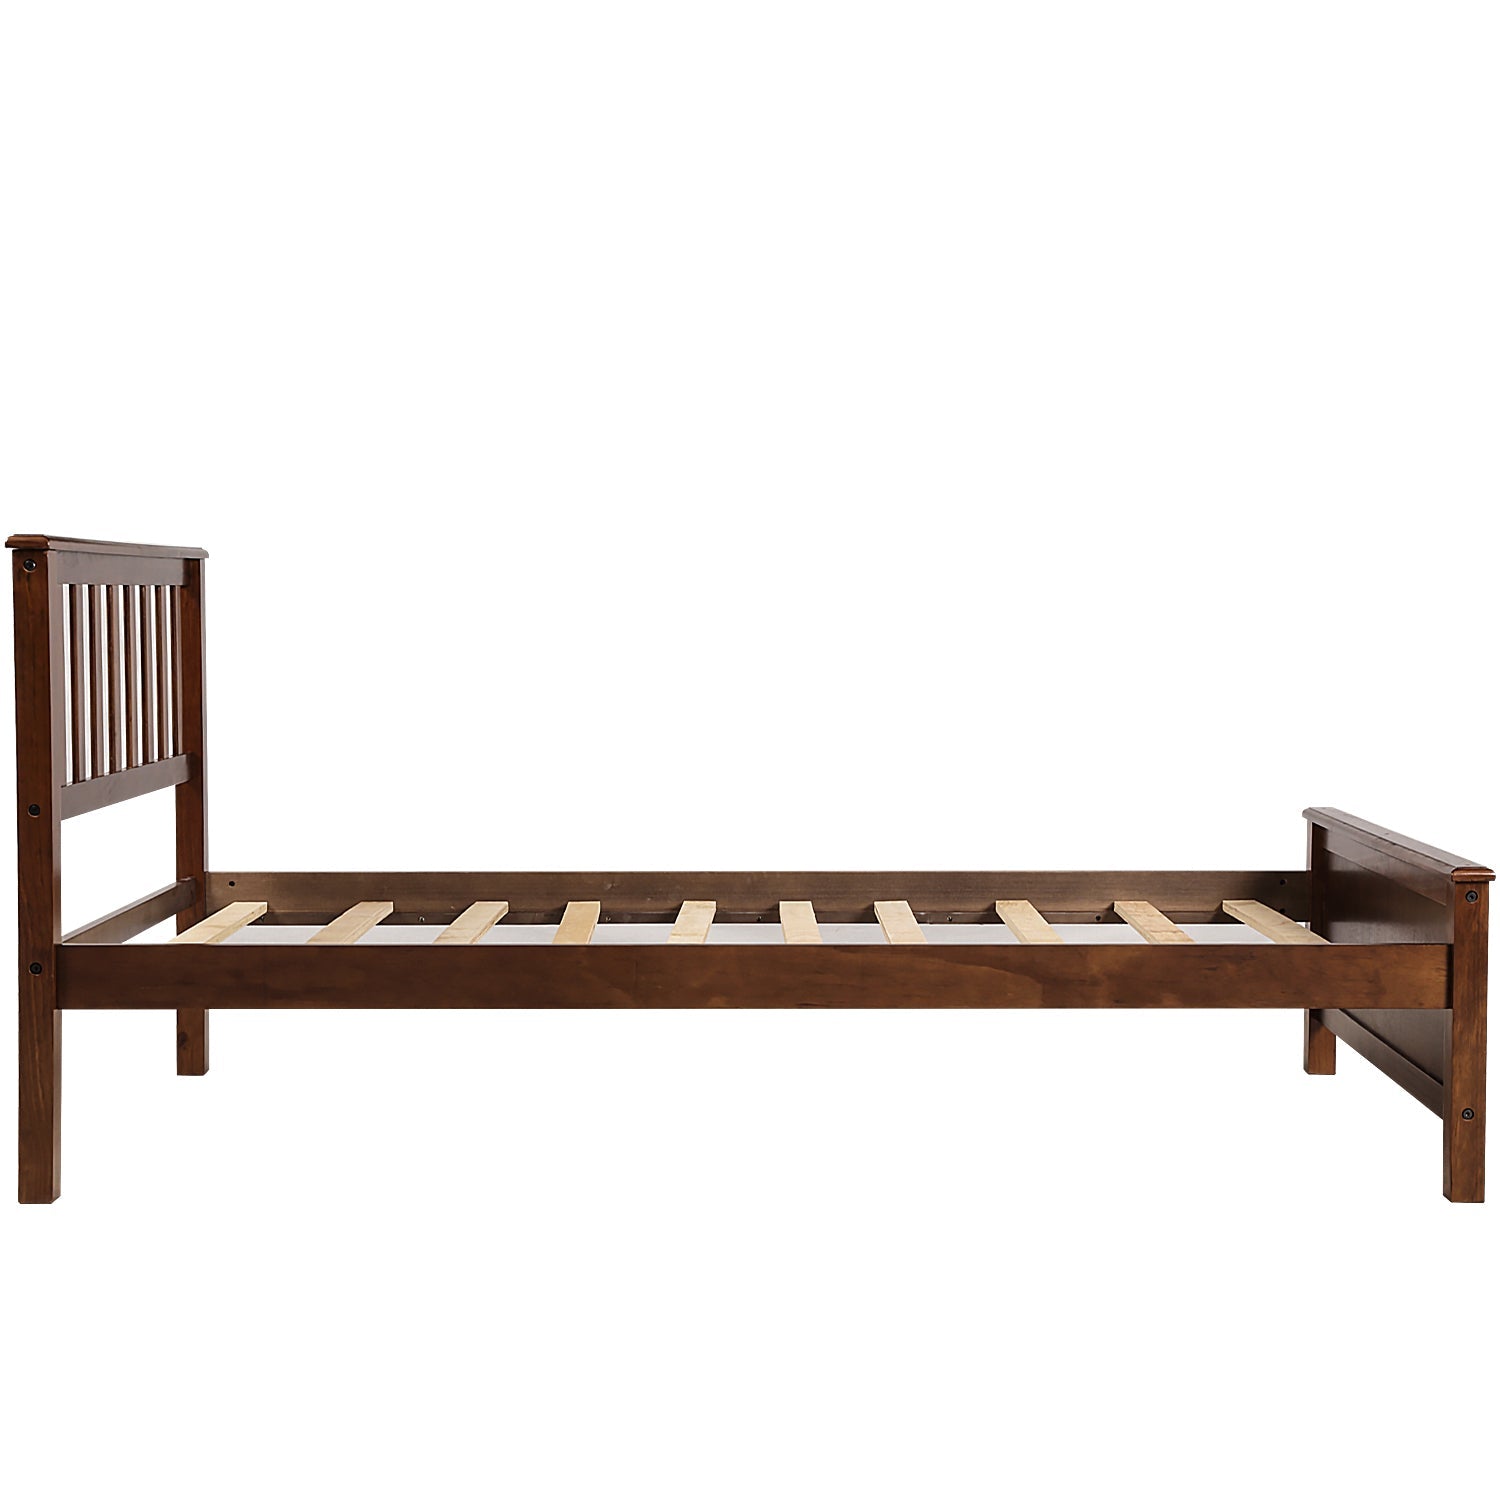 Twin Size Wood Platform Bed with Headboard, Footboard, and Wood Slat Support | Walnut Finish | Sturdy Construction